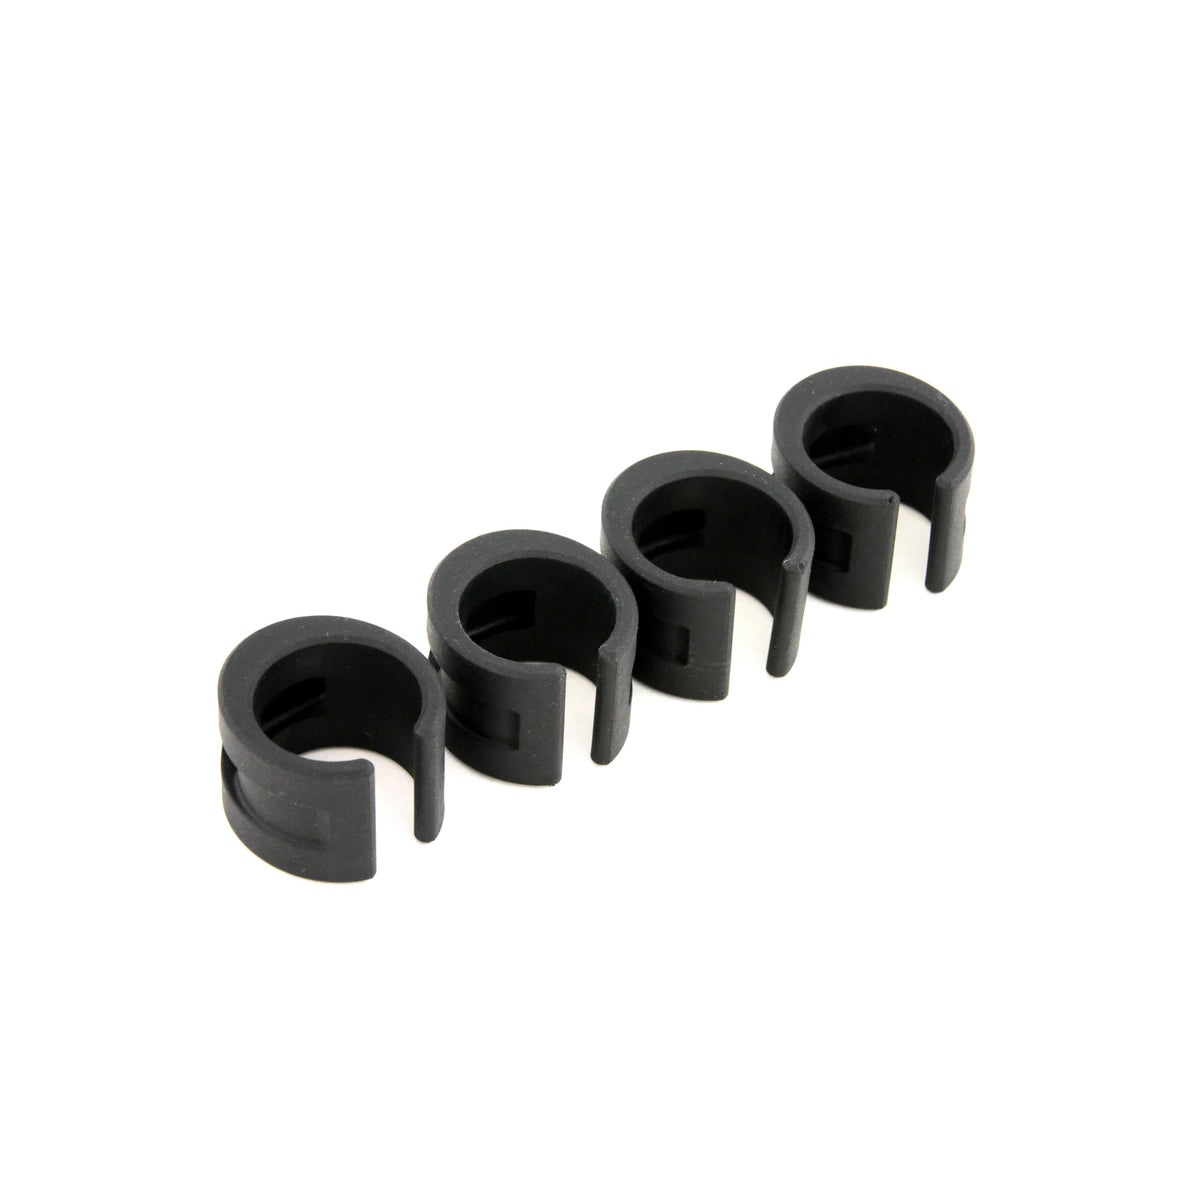 DaBomb Chain Protector Ring - Set of 4 - Black